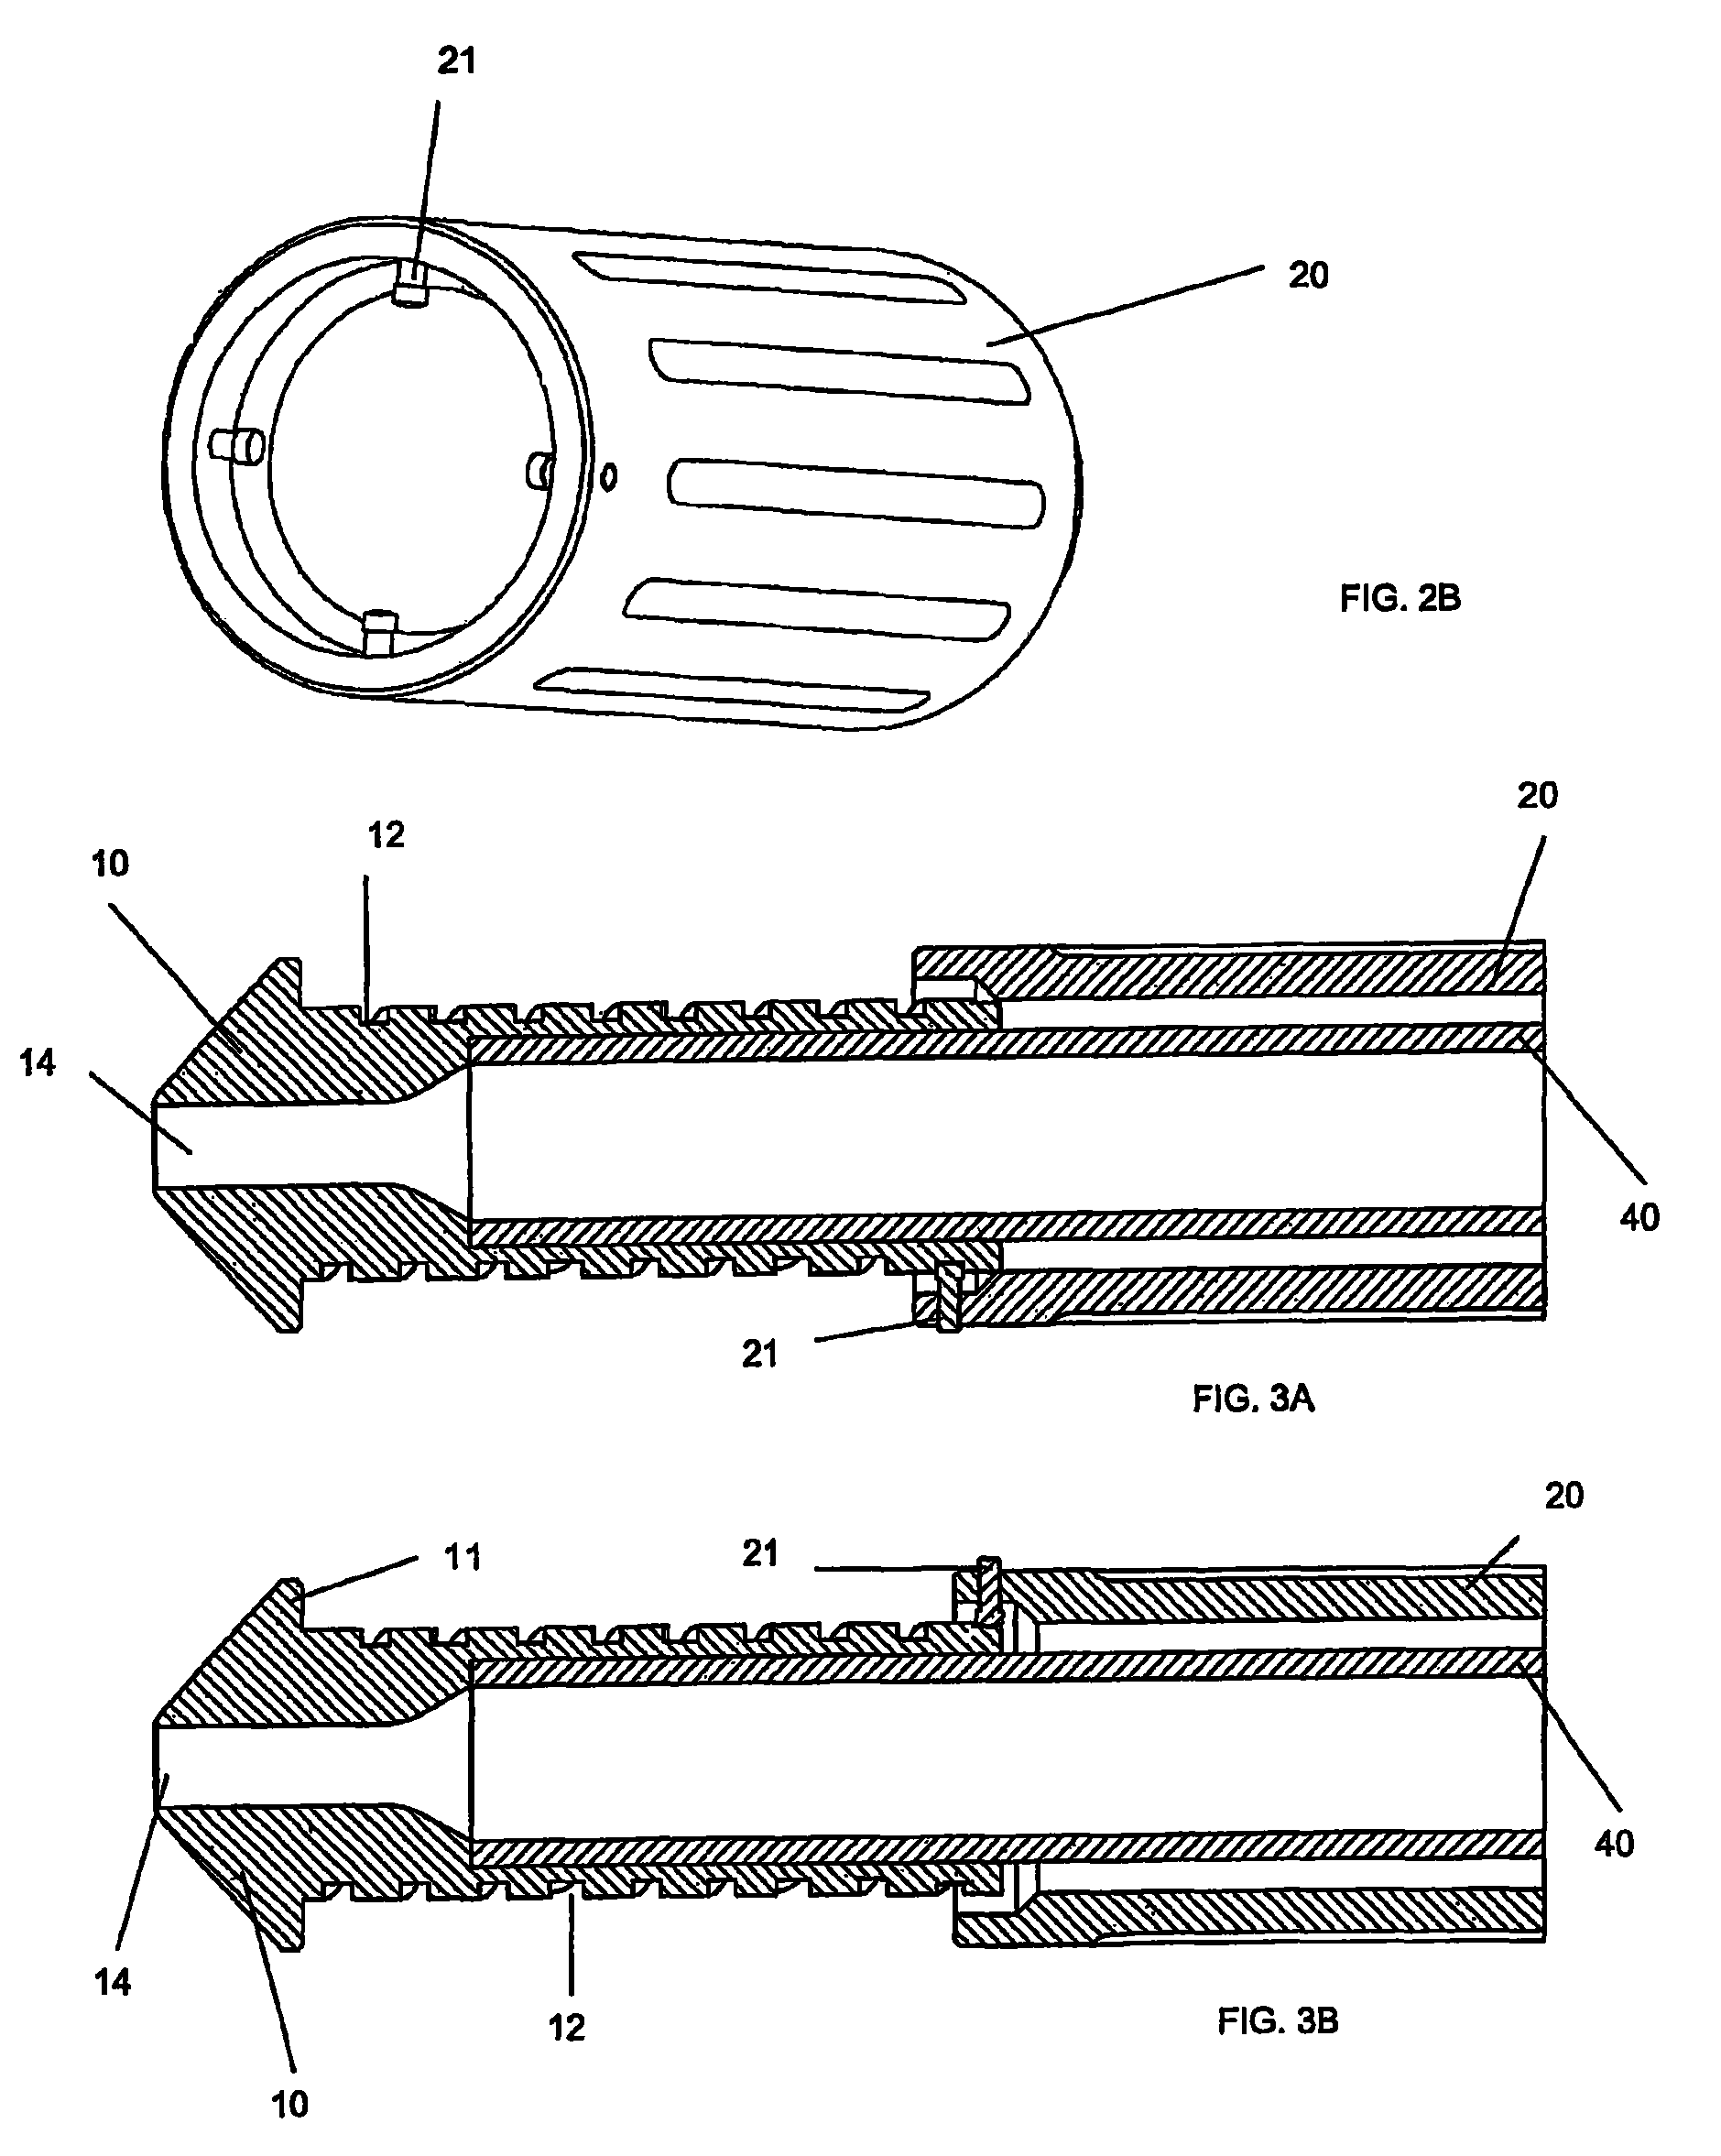 Control device for medical catheters